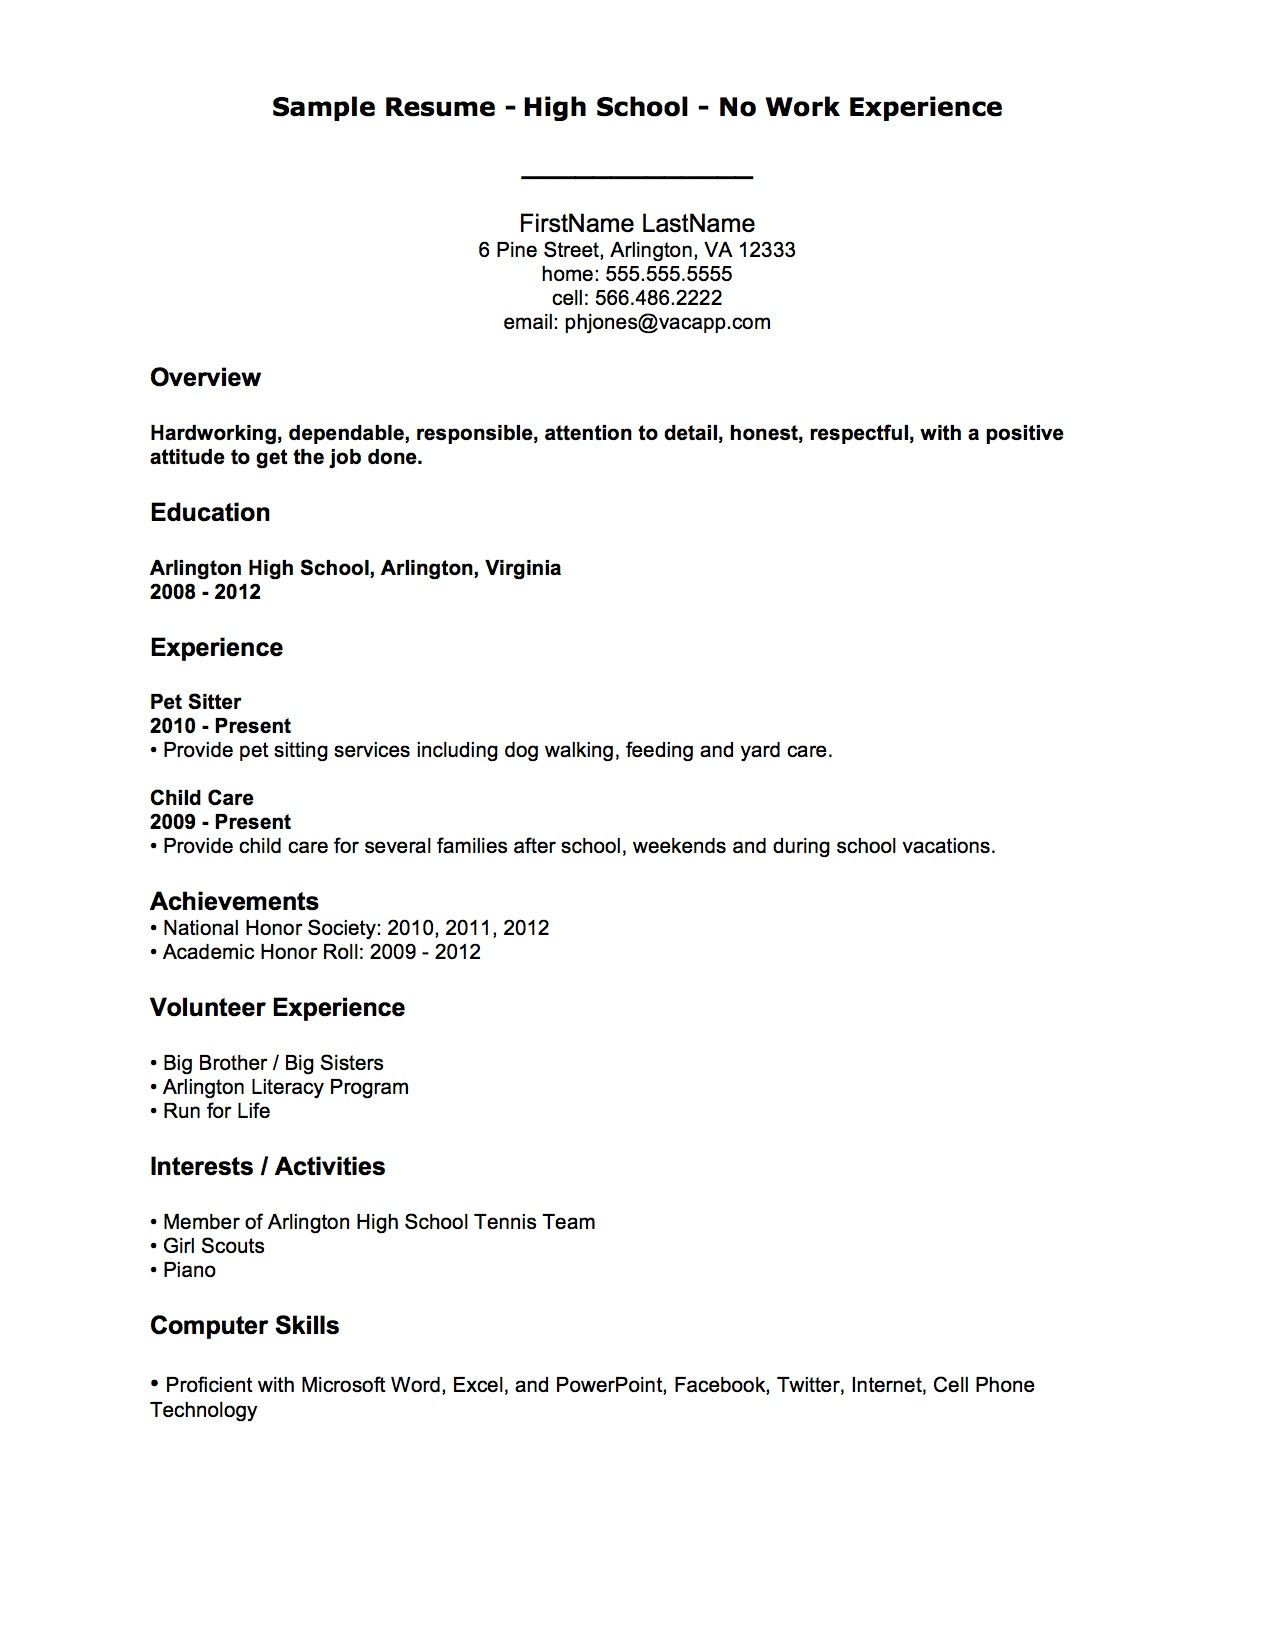 Resume Templates College Student No Job Experience Resume Examples with No Job Experience , #examples #experience …